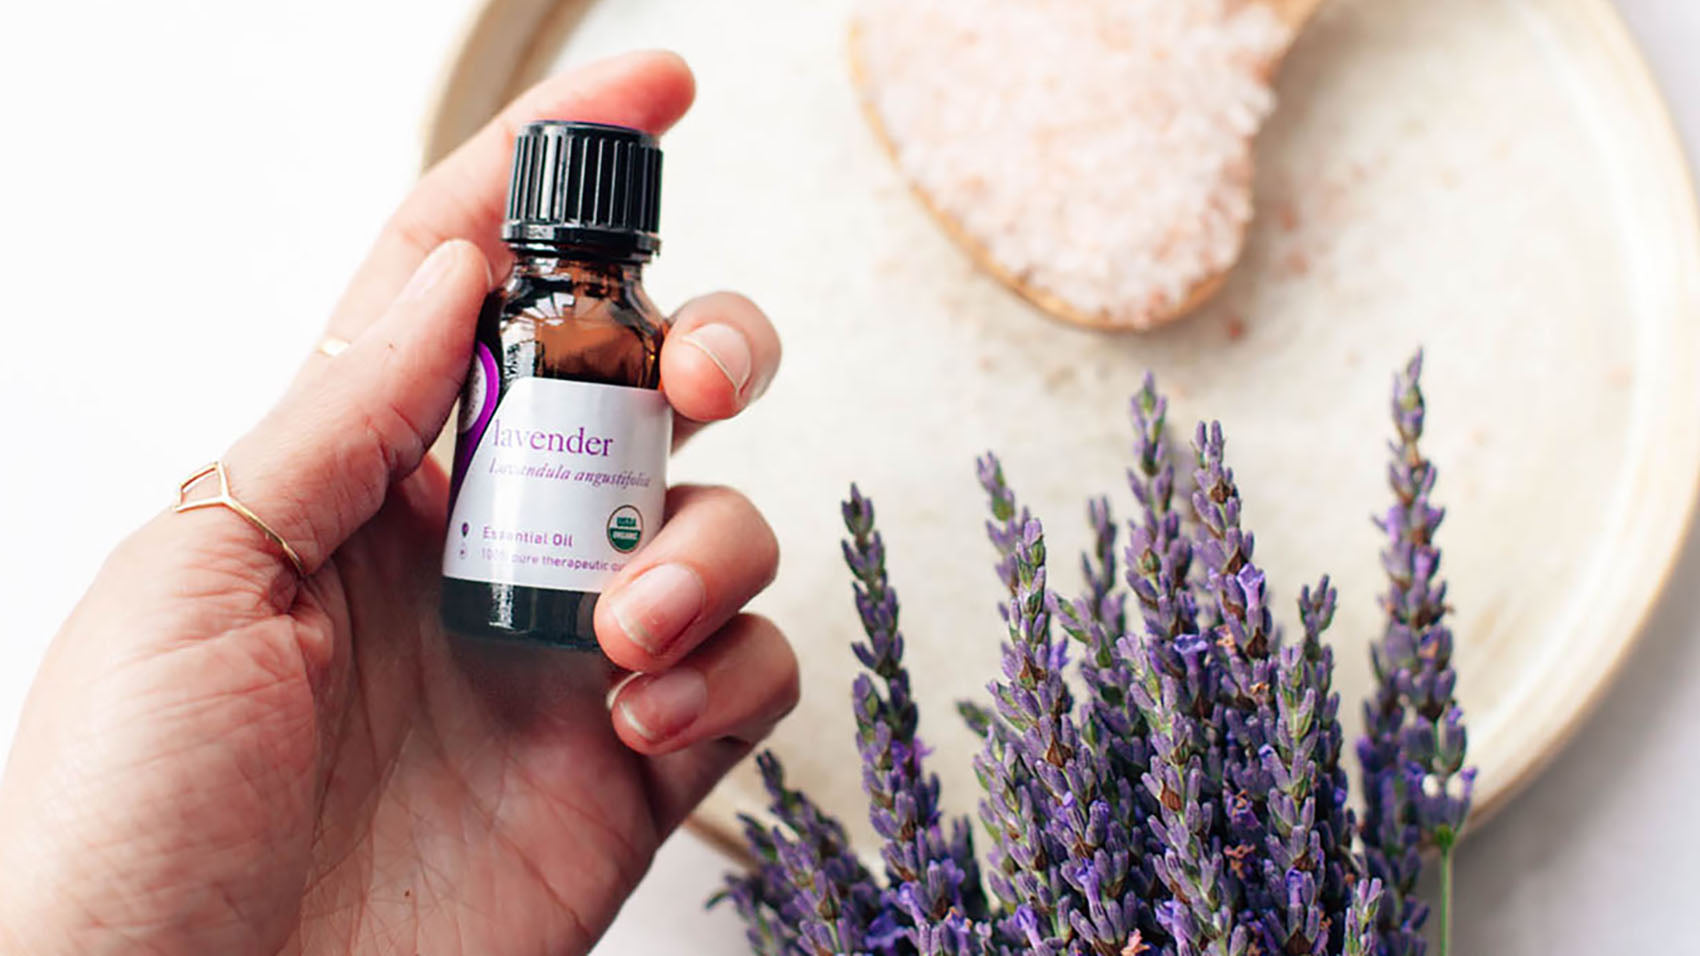 Getting Started with Essential Oils: 10 Tips for Safety & Quality